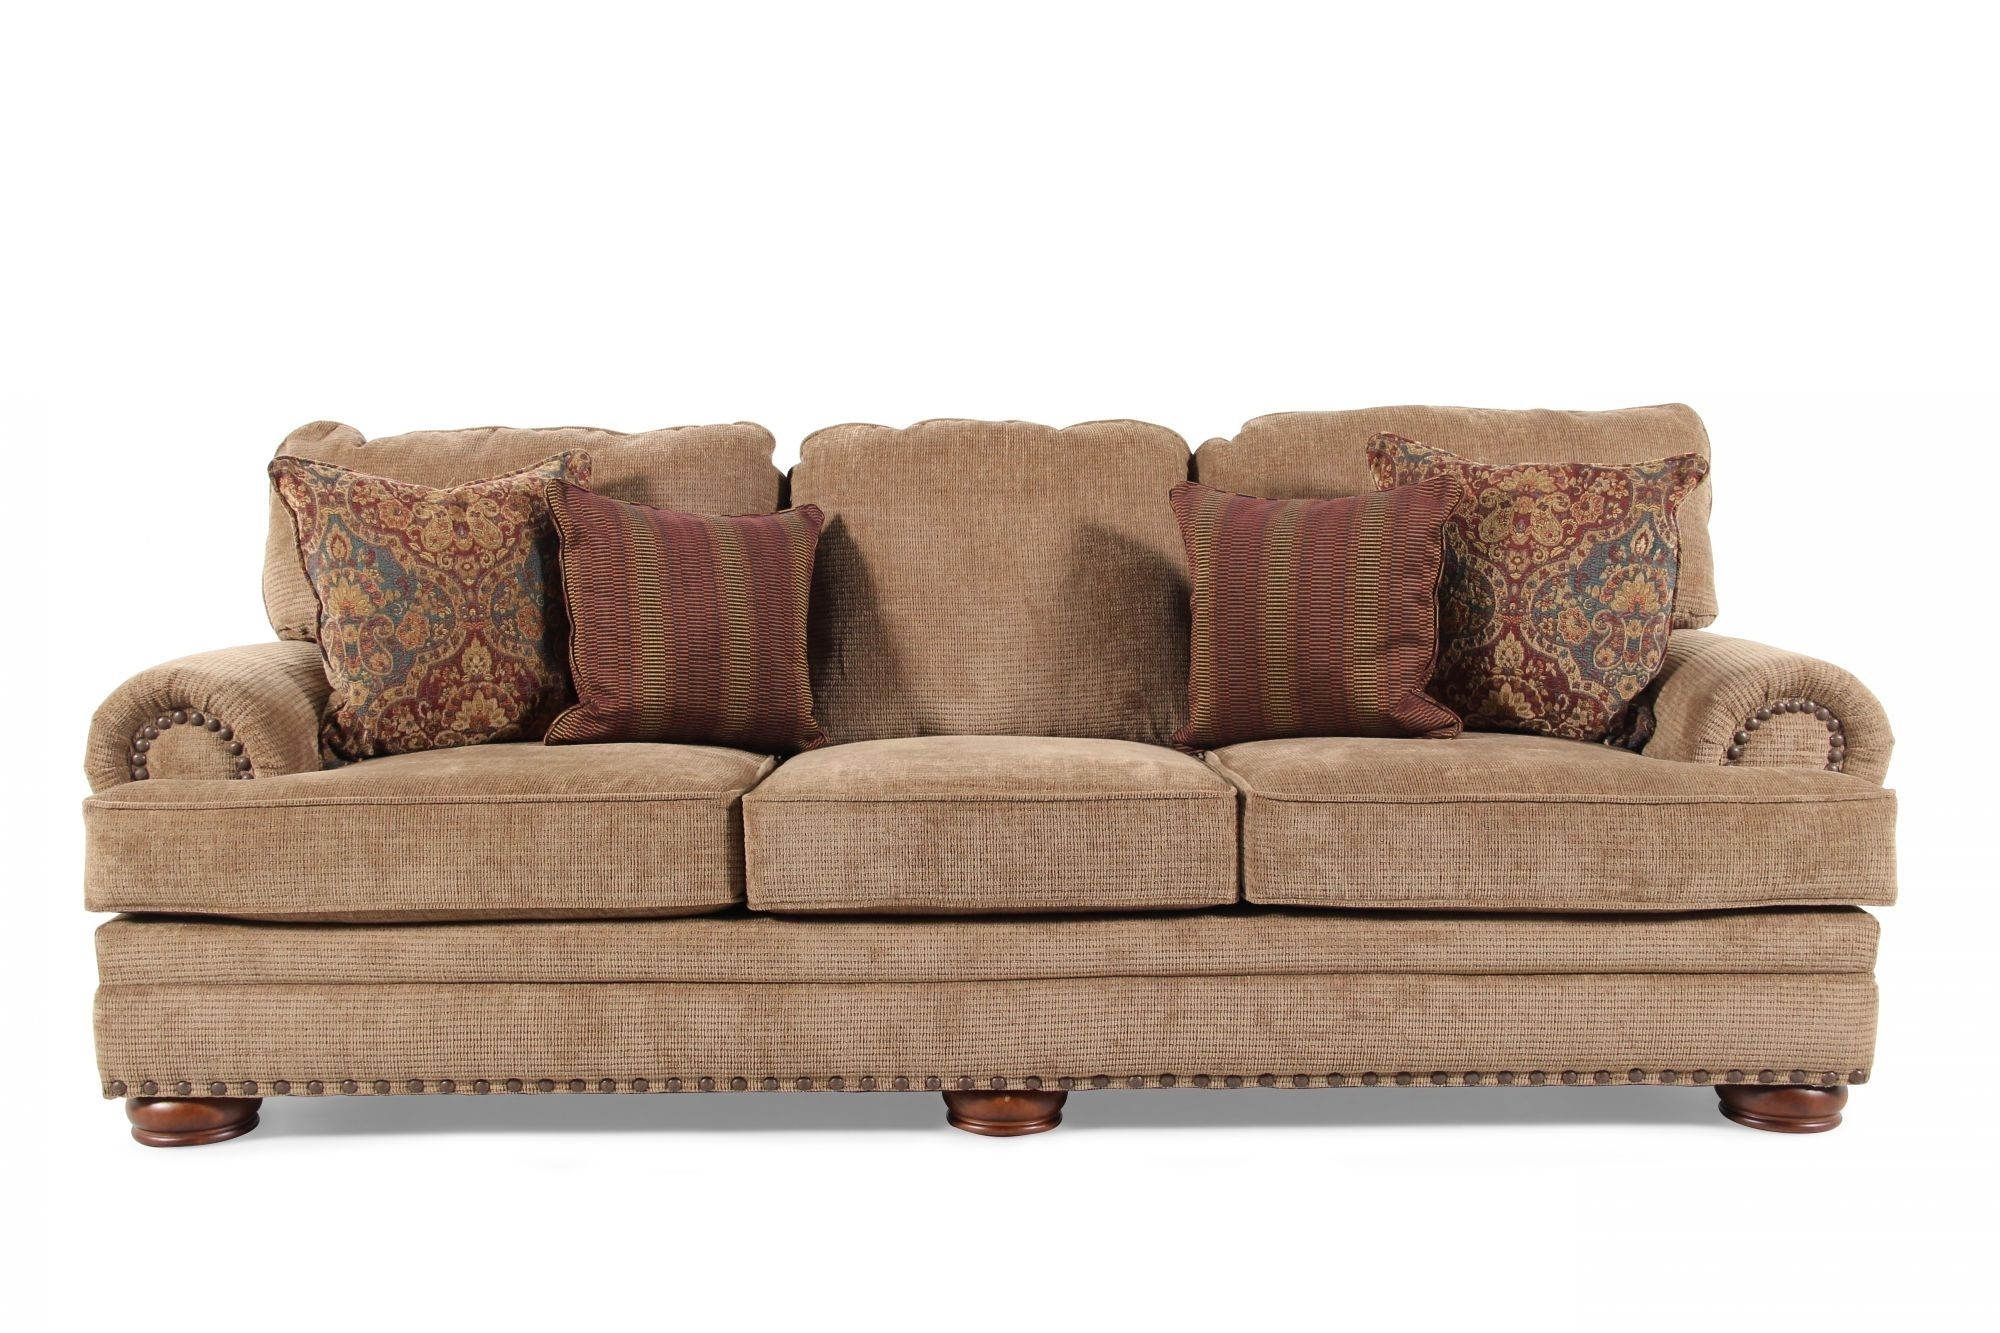 mathis brothers furniture sofa beds